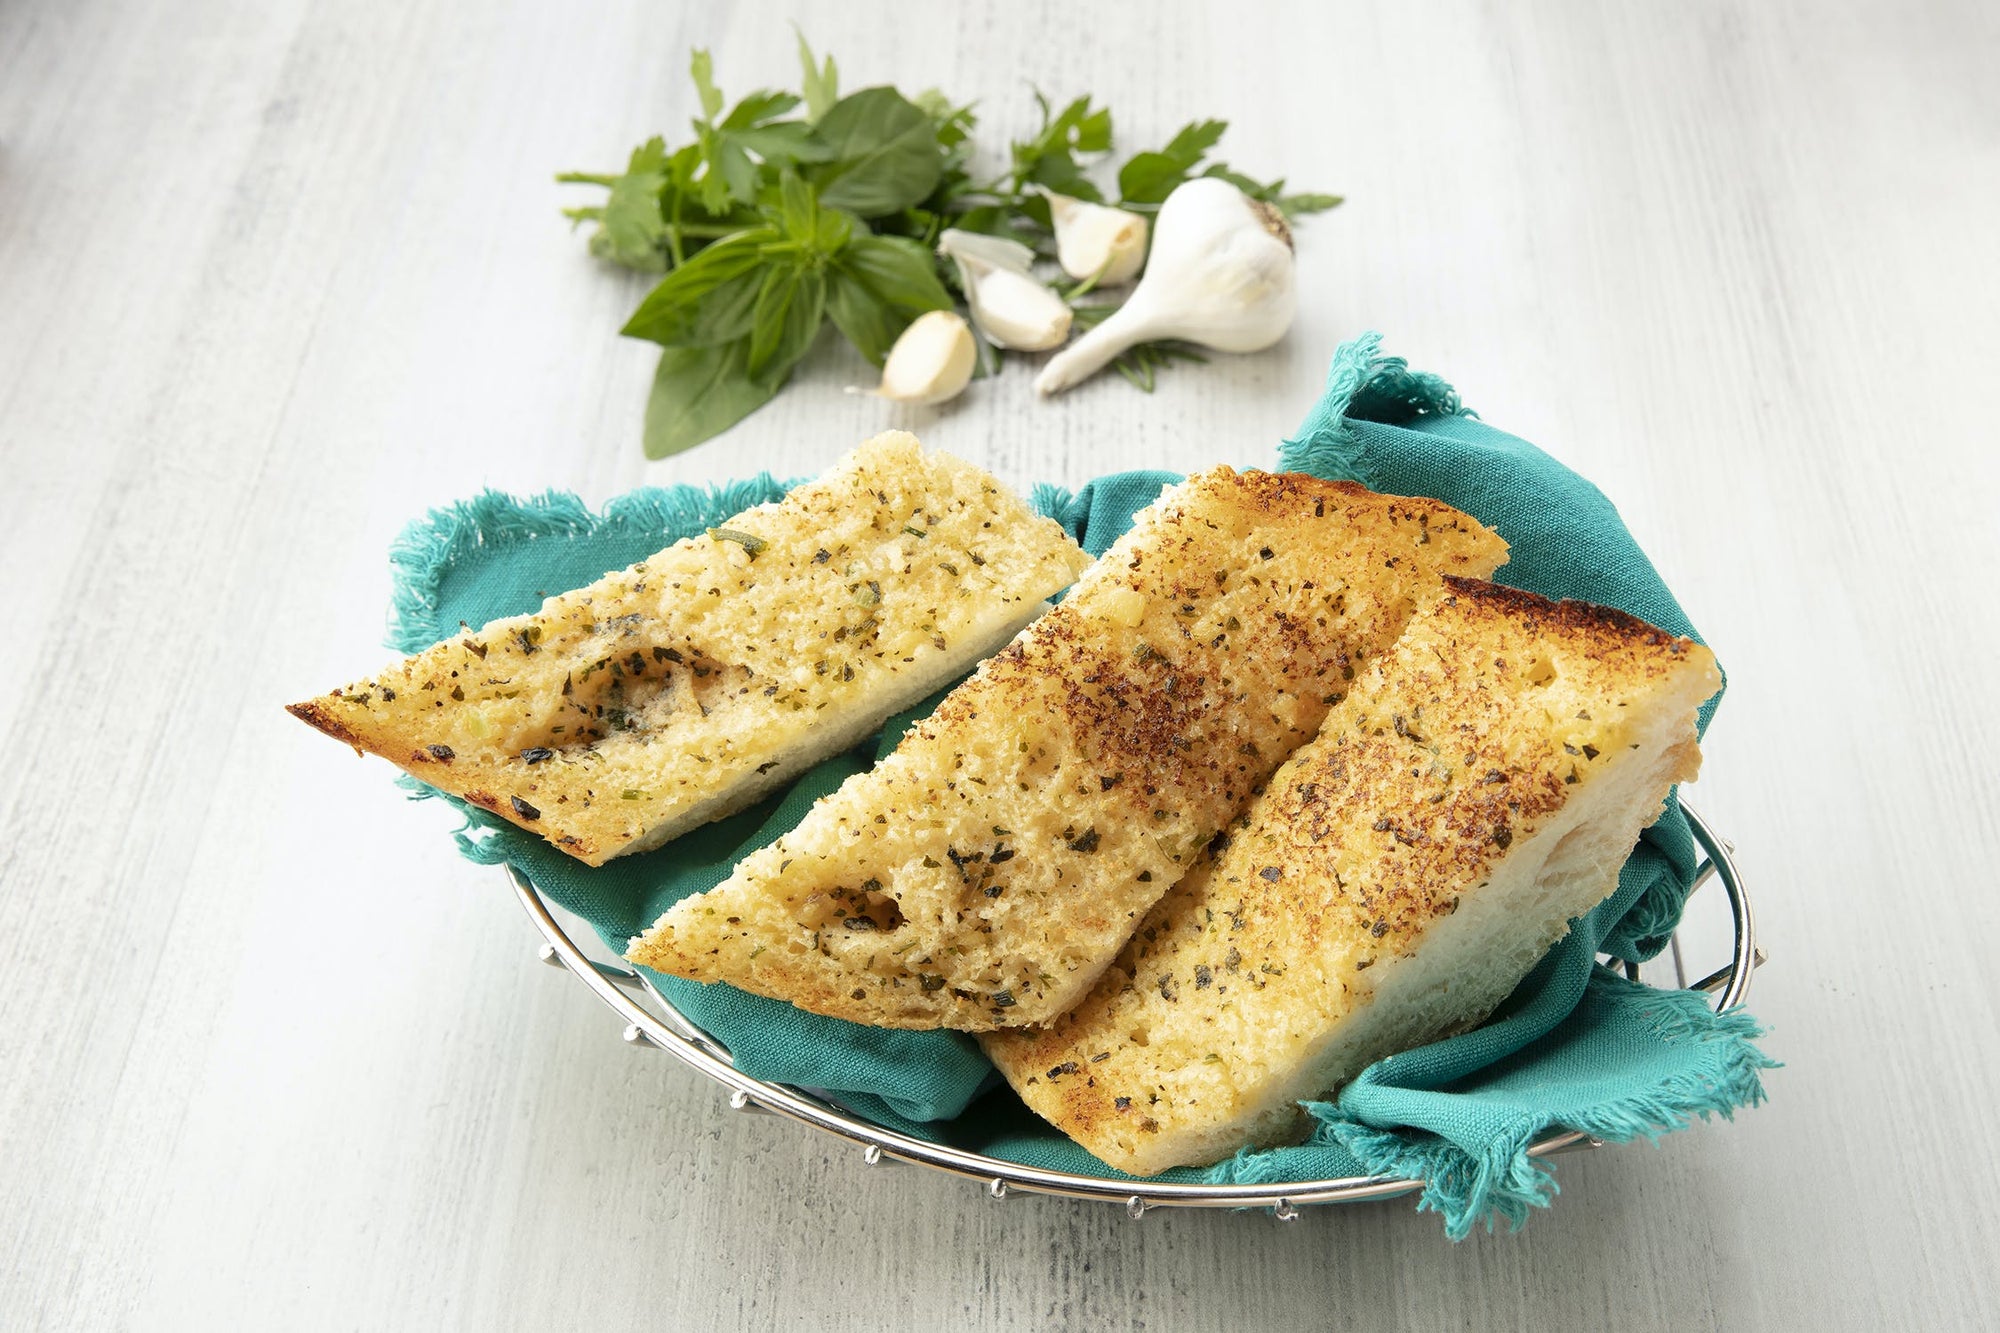 Garlic Bread made with Epicurean Butter Organic Roasted Garlic Herb Flavored Butter